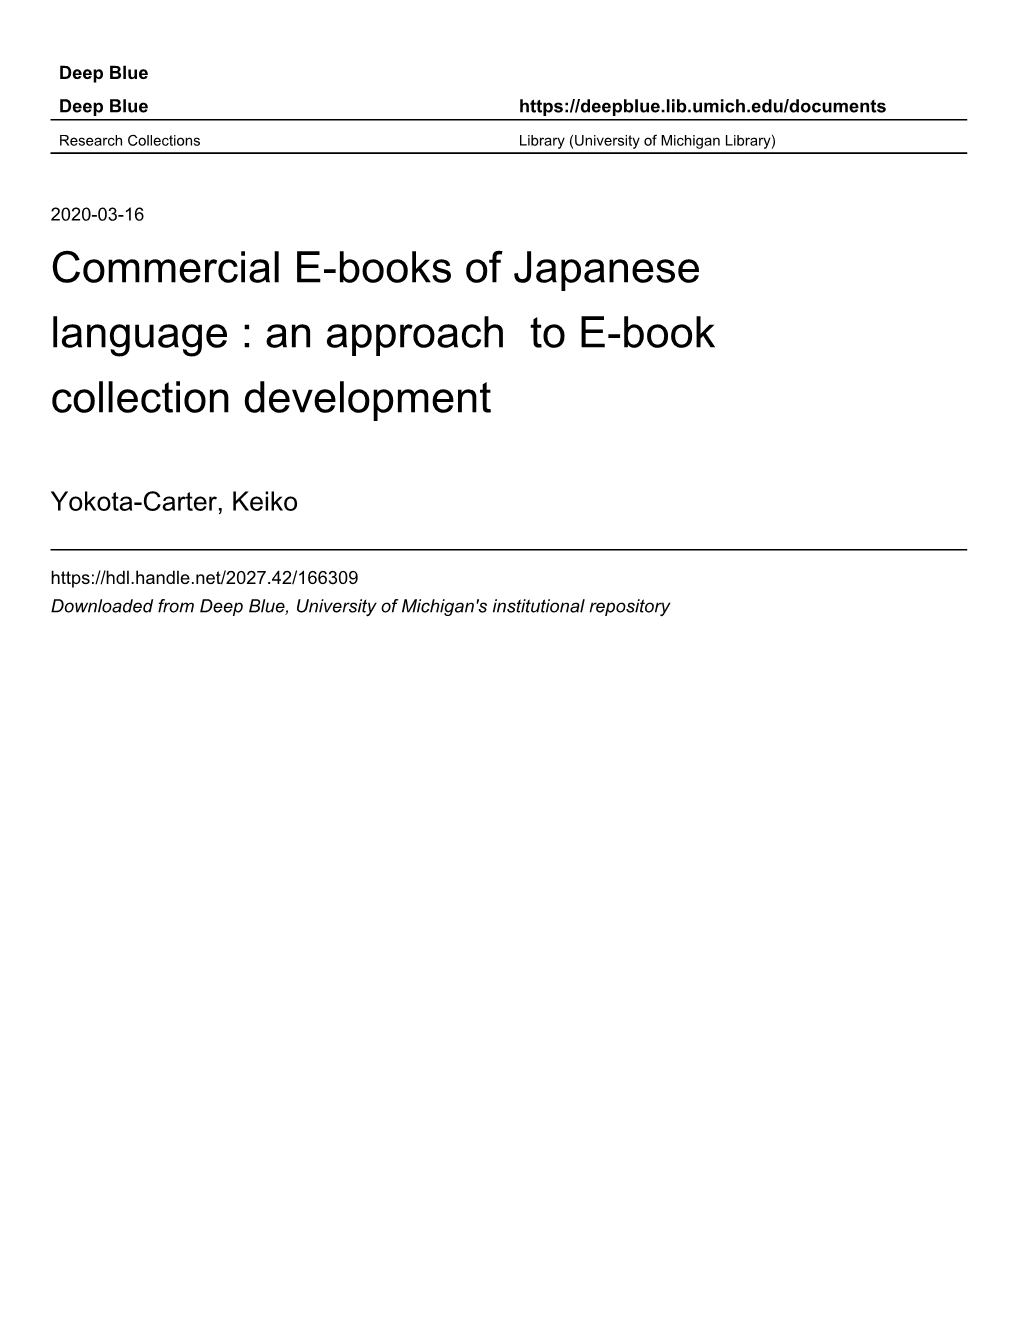 Commercial E-Books of Japanese Language : an Approach to E-Book Collection Development